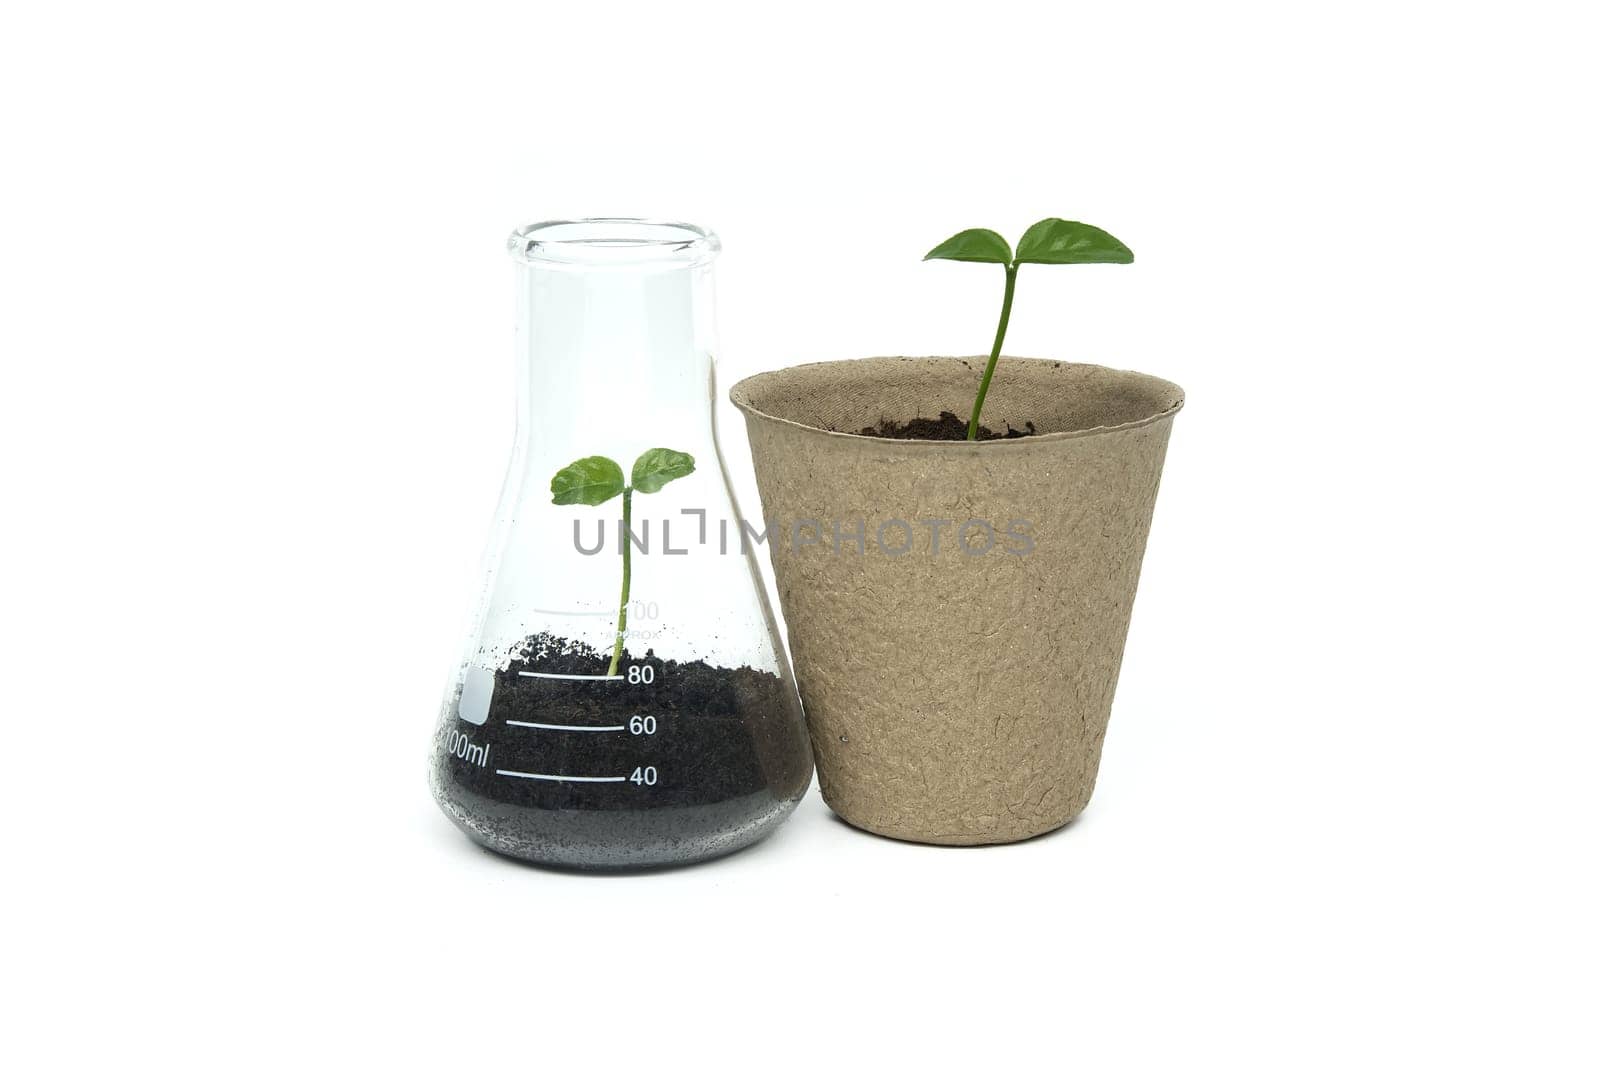 Green seedling sprouting from biodegradable pot near conical glass flask filled with soil and green plant, isolated on white background